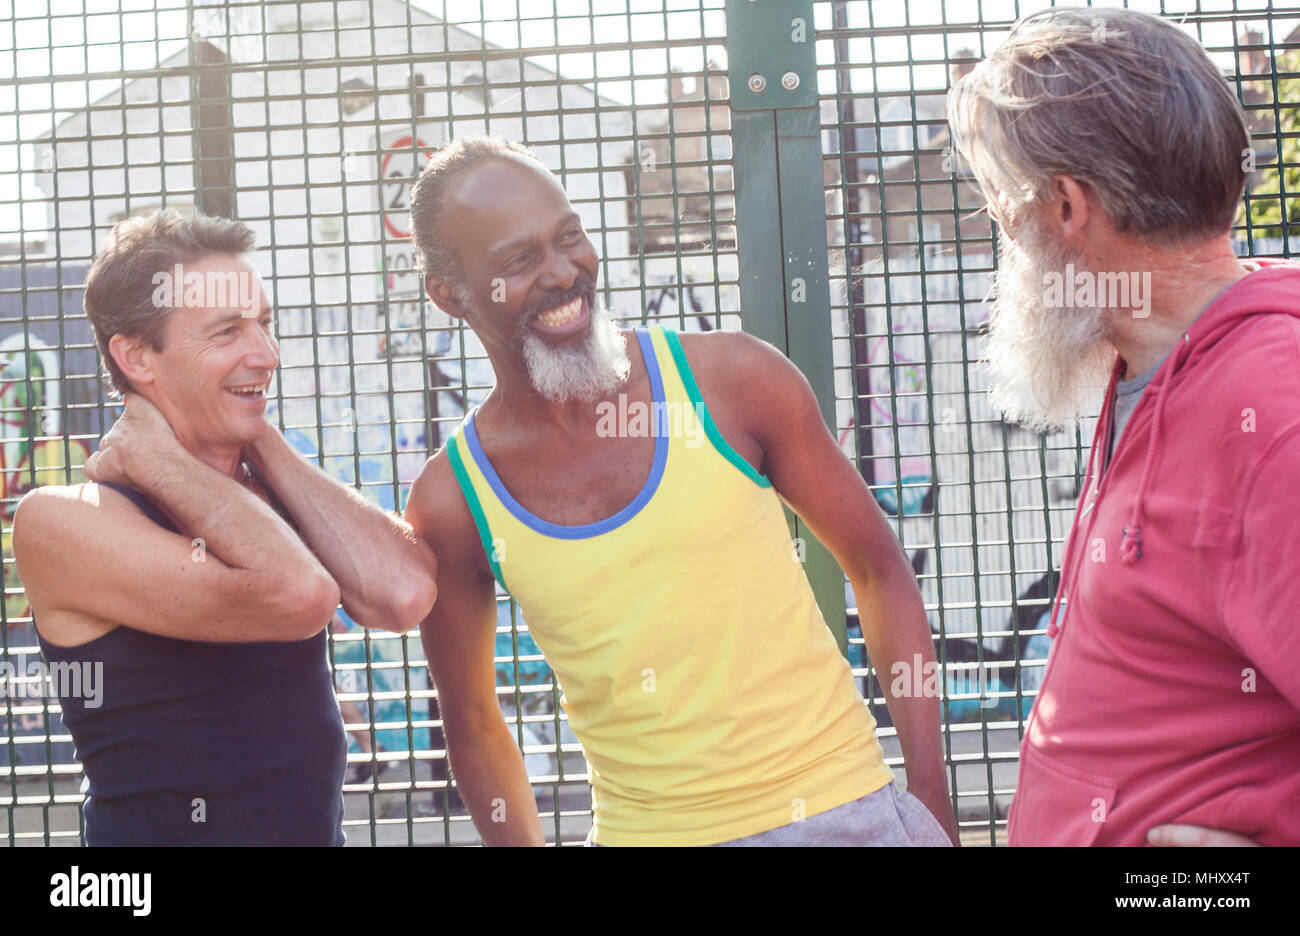 Three mature men in basketball court, laughing together Stock Photo